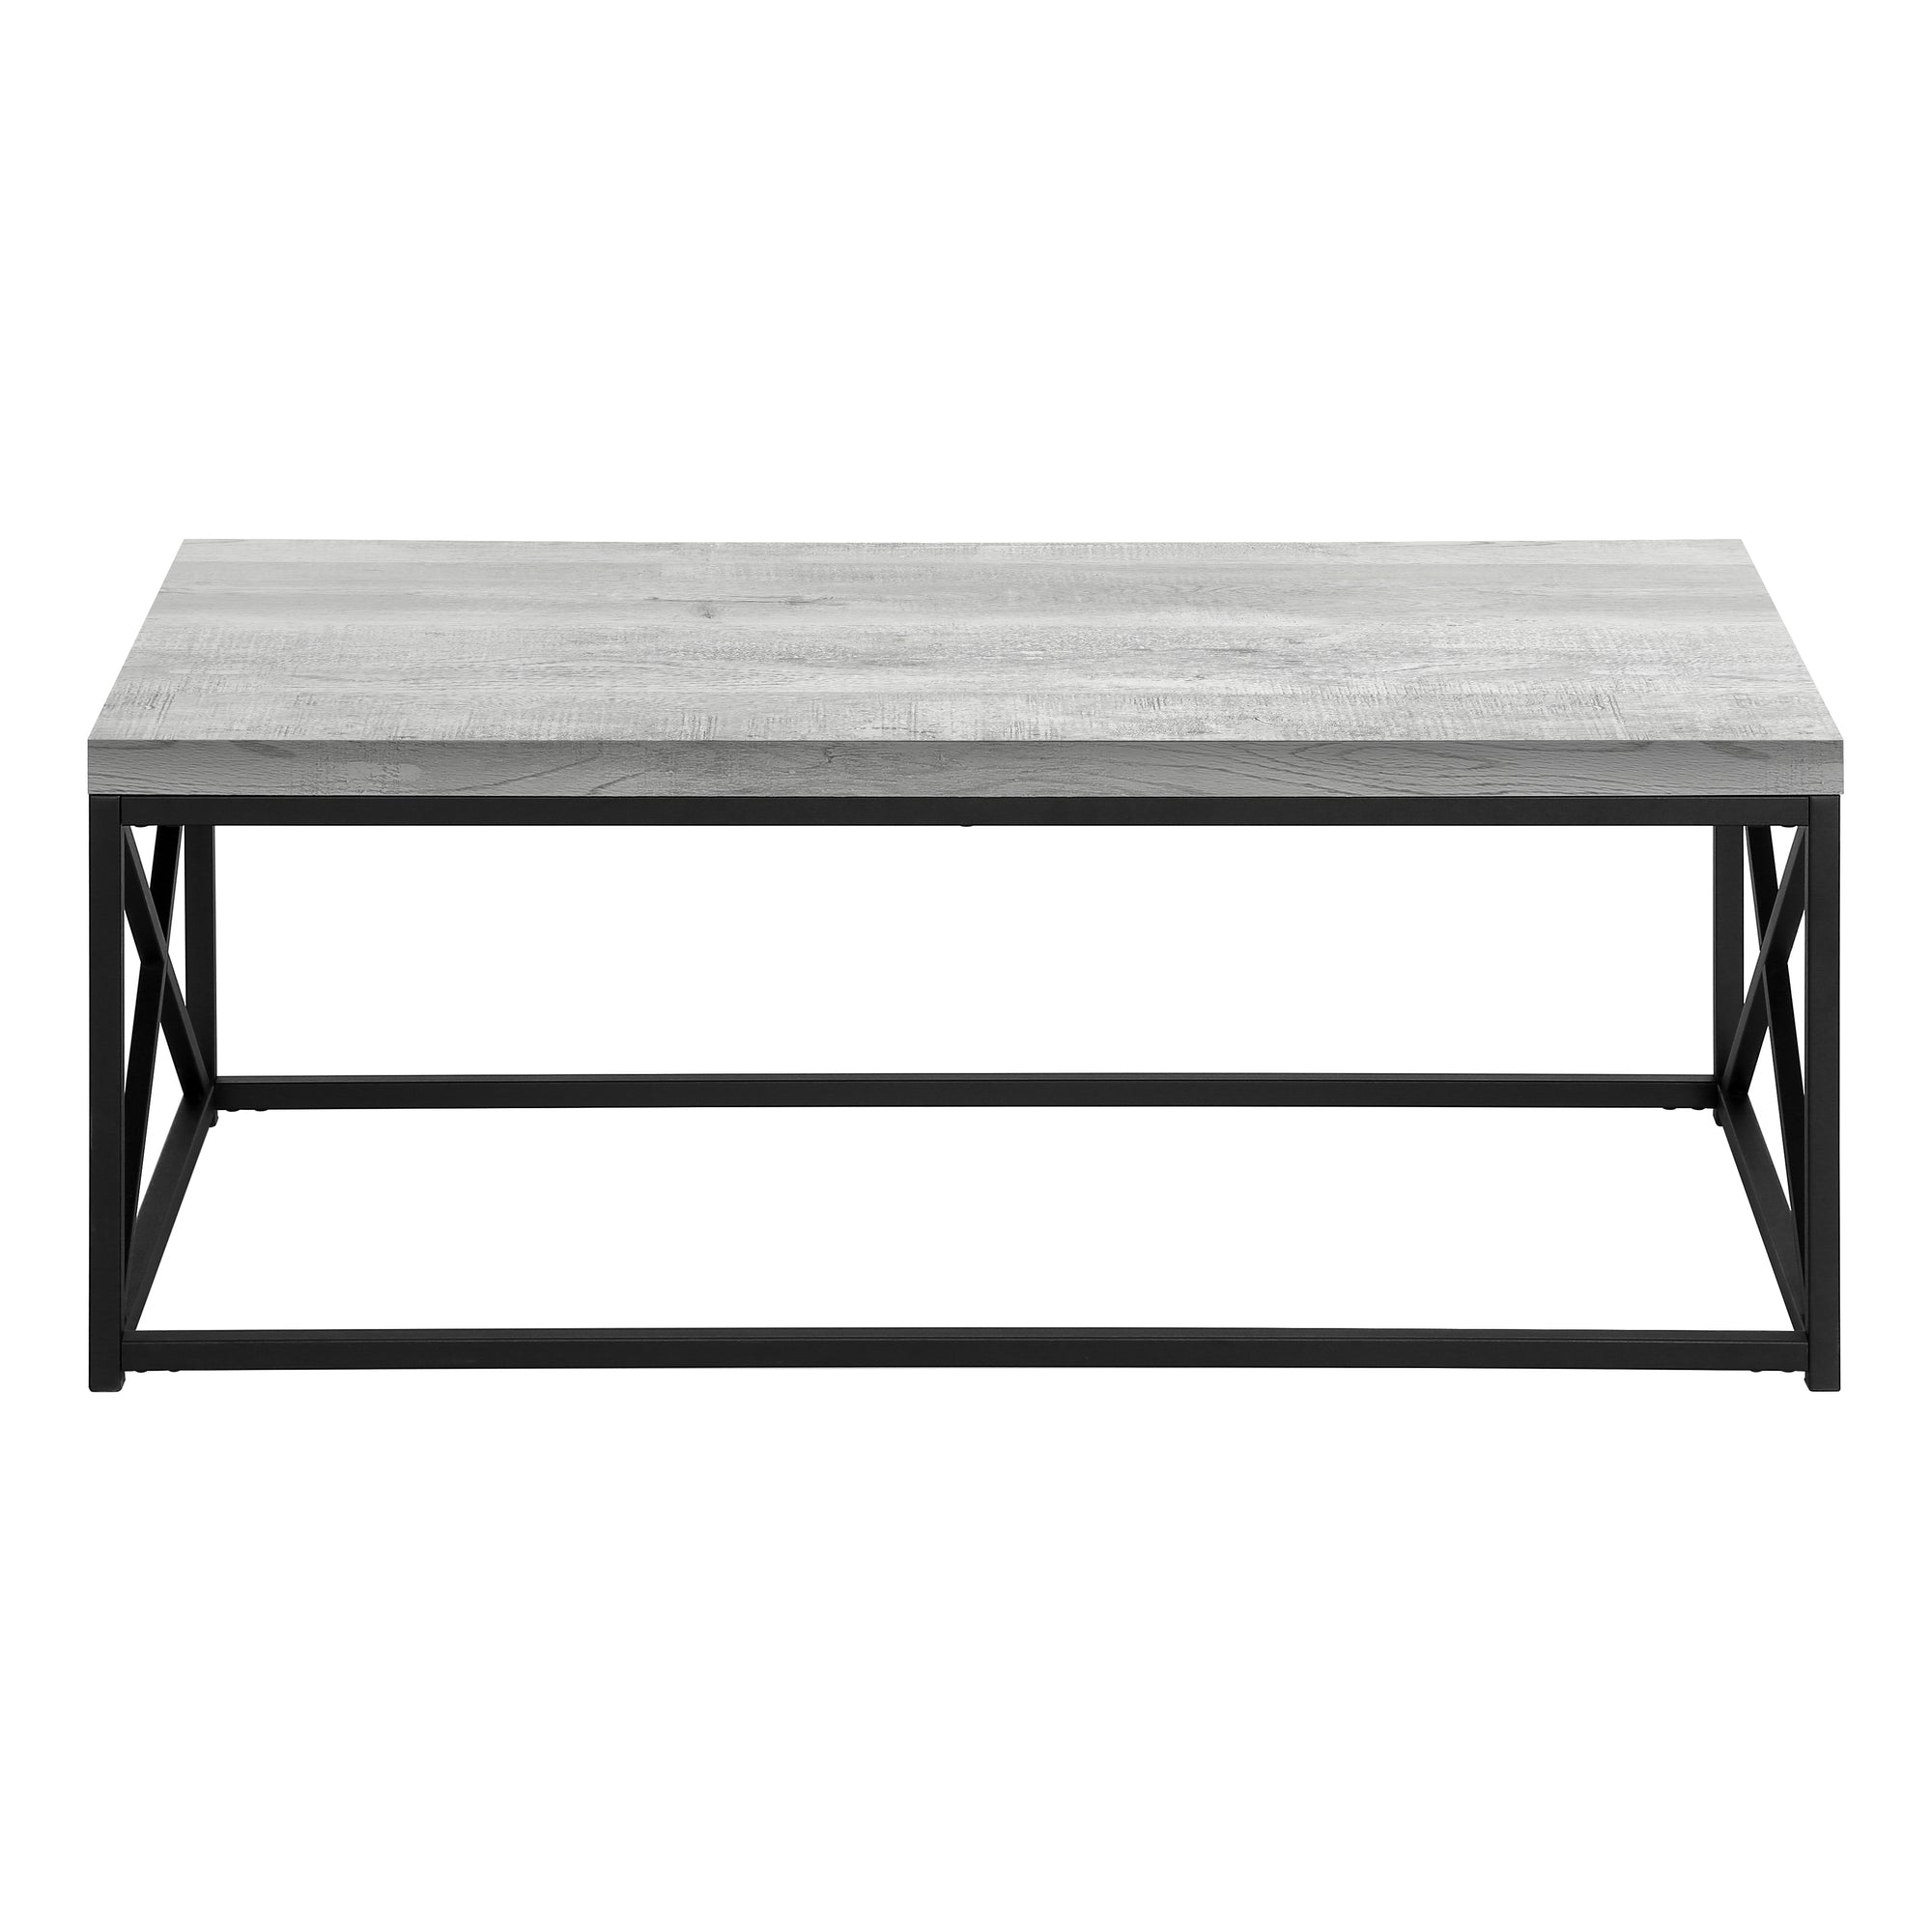 MN-563417    Coffee Table, Accent, Cocktail, Rectangular, Living Room, Metal Frame, Laminate, Grey Reclaimed Wood Look, Black, Contemporary, Modern